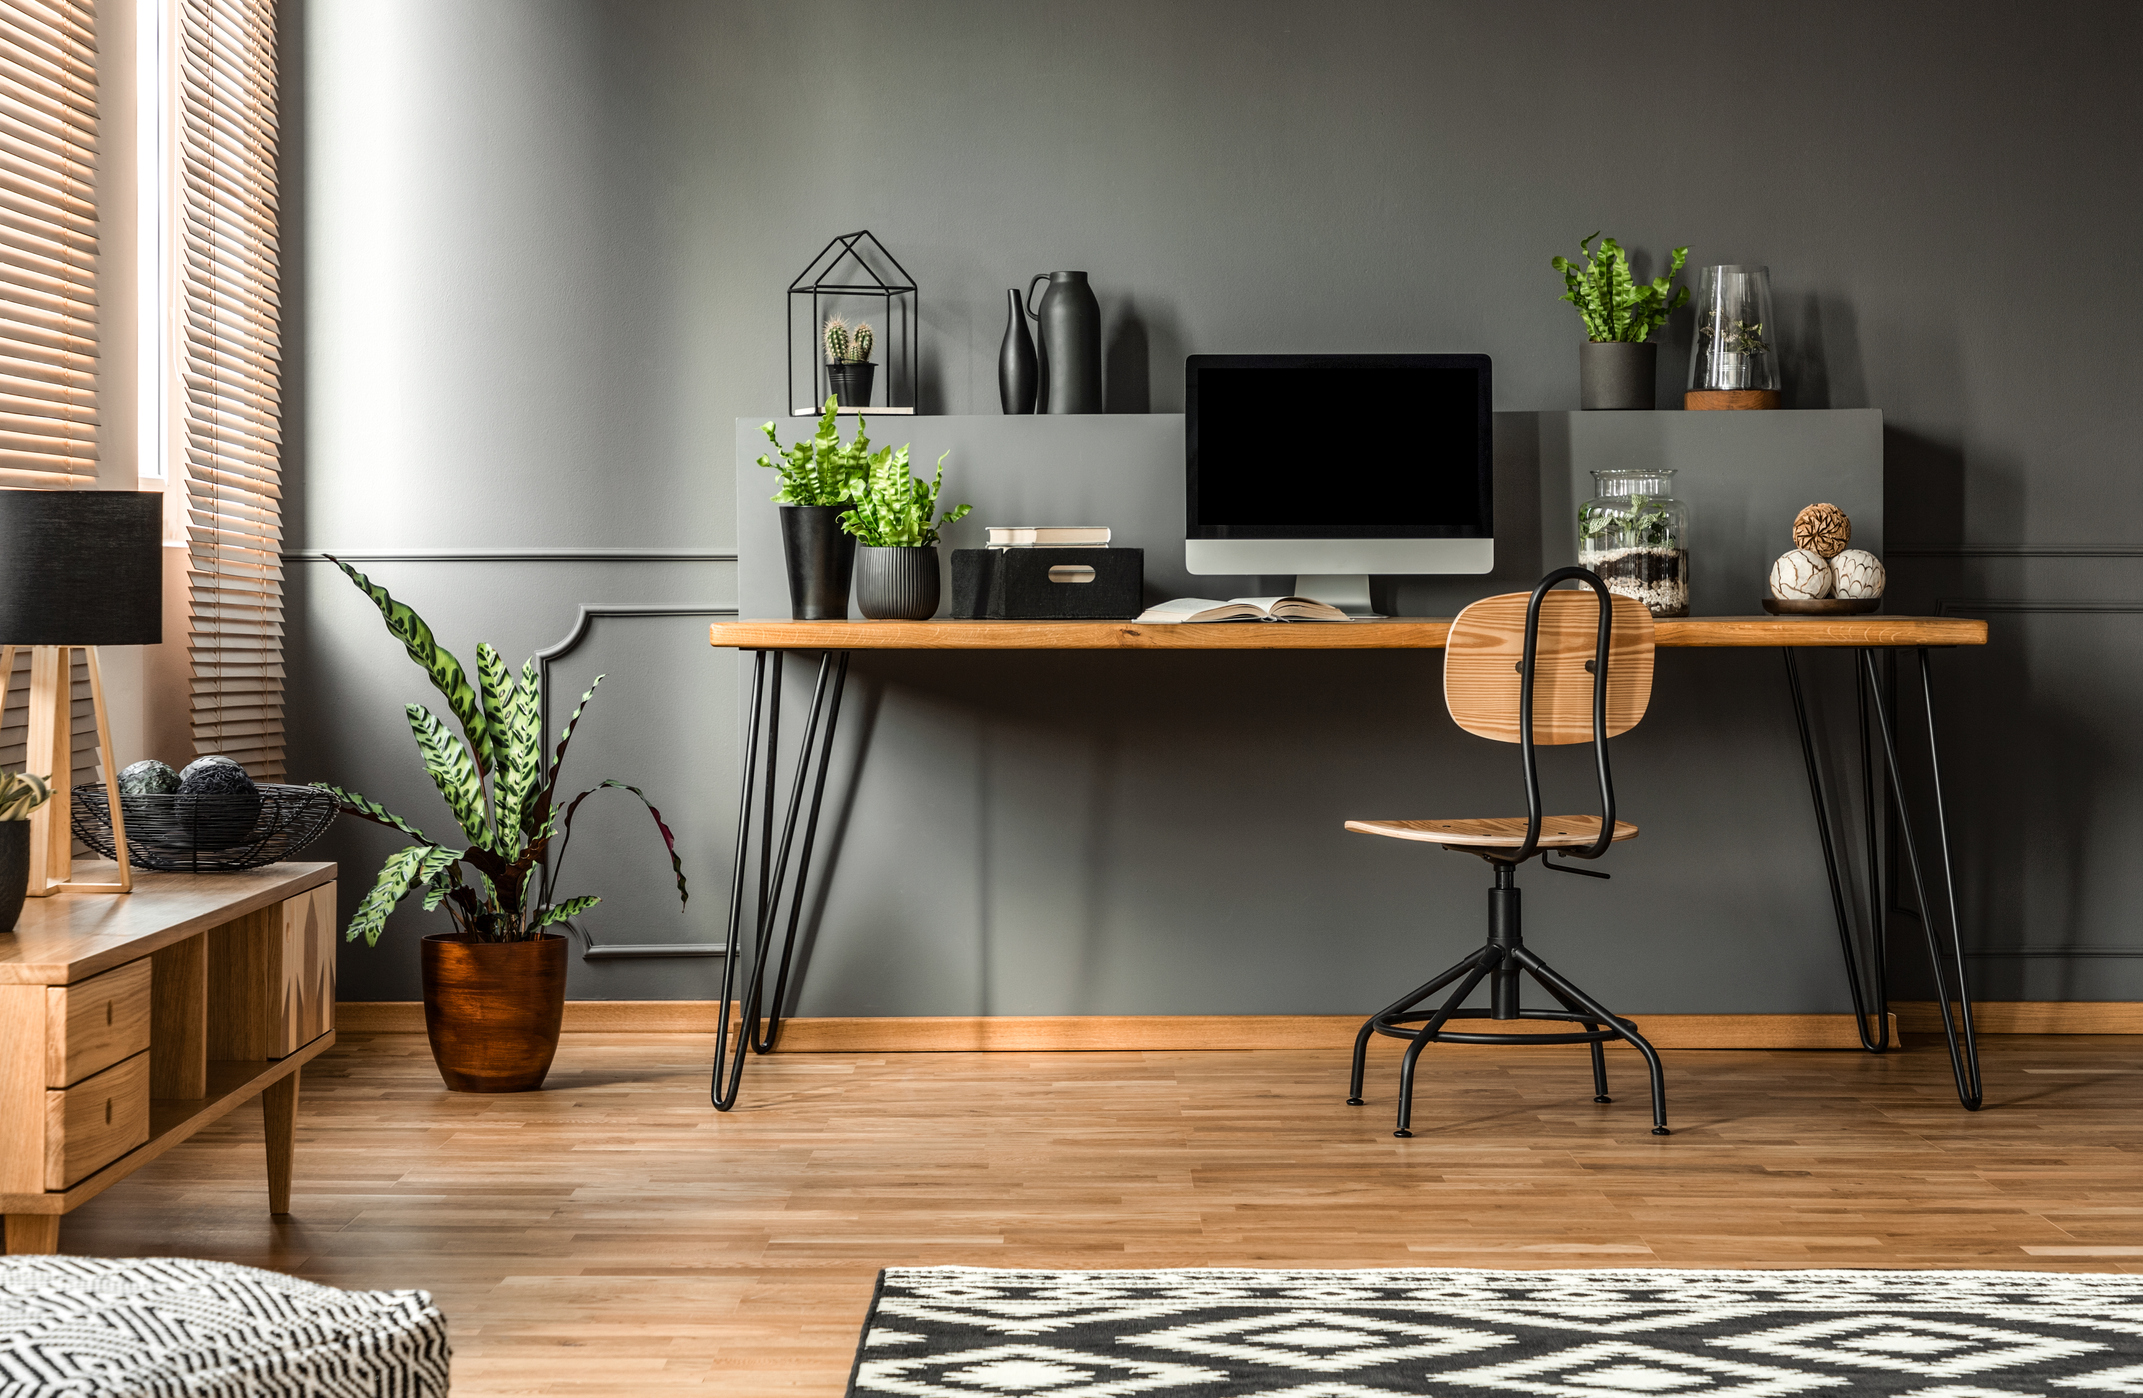 https://www.singhhomes.com/wp-content/uploads/2019/03/Create-the-Perfect-Home-Workstation-or-Office-2.jpg